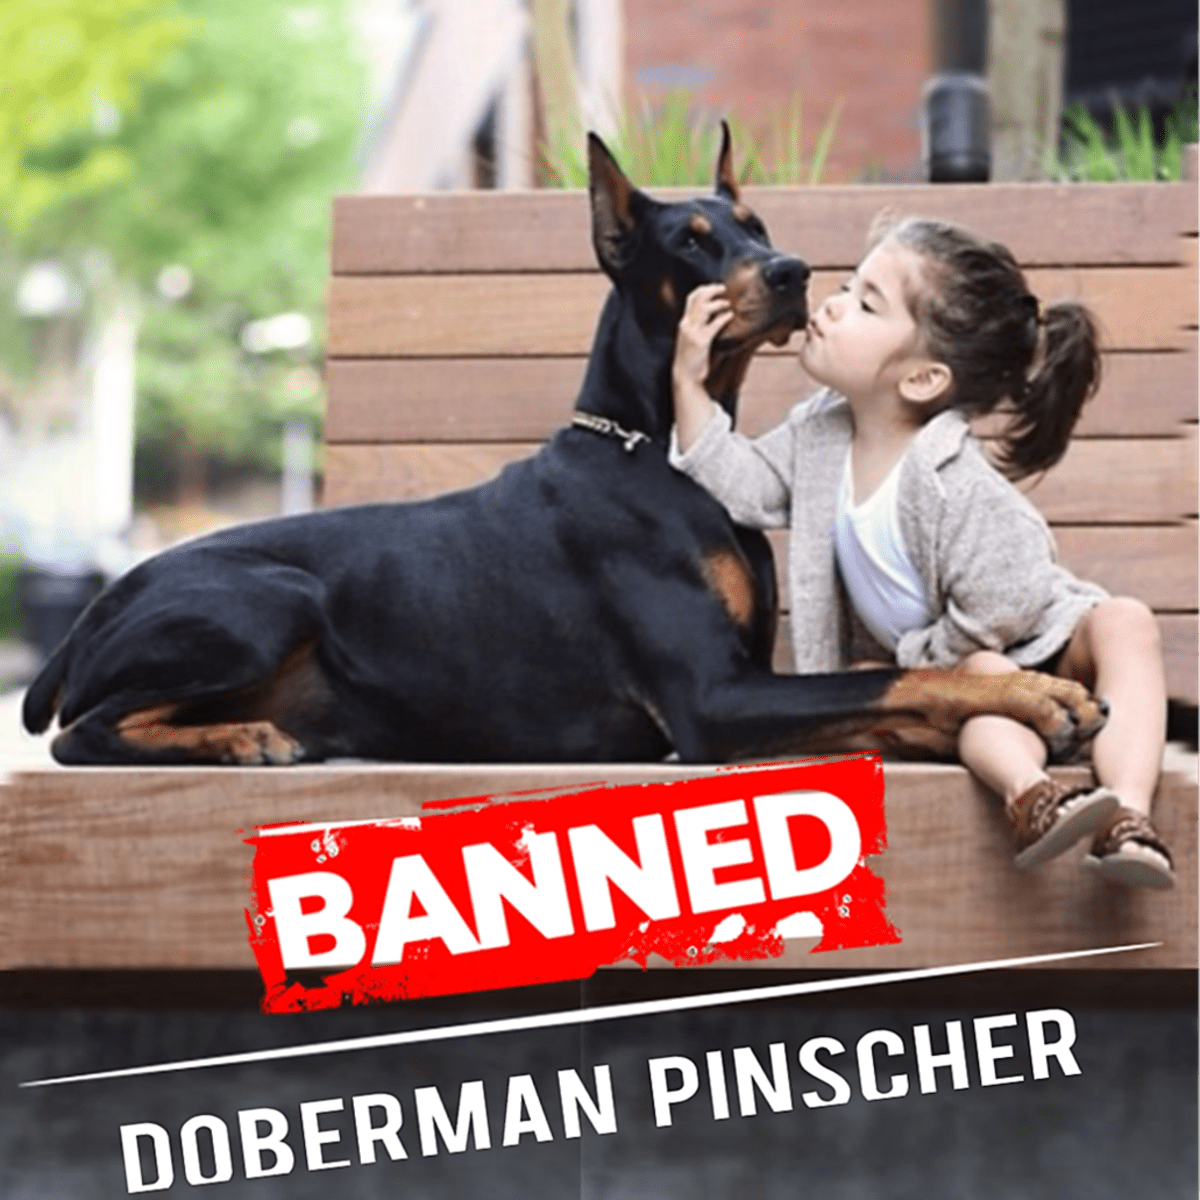 11 Countries Where Doberman Pinschers Are Banned or Restricted ...